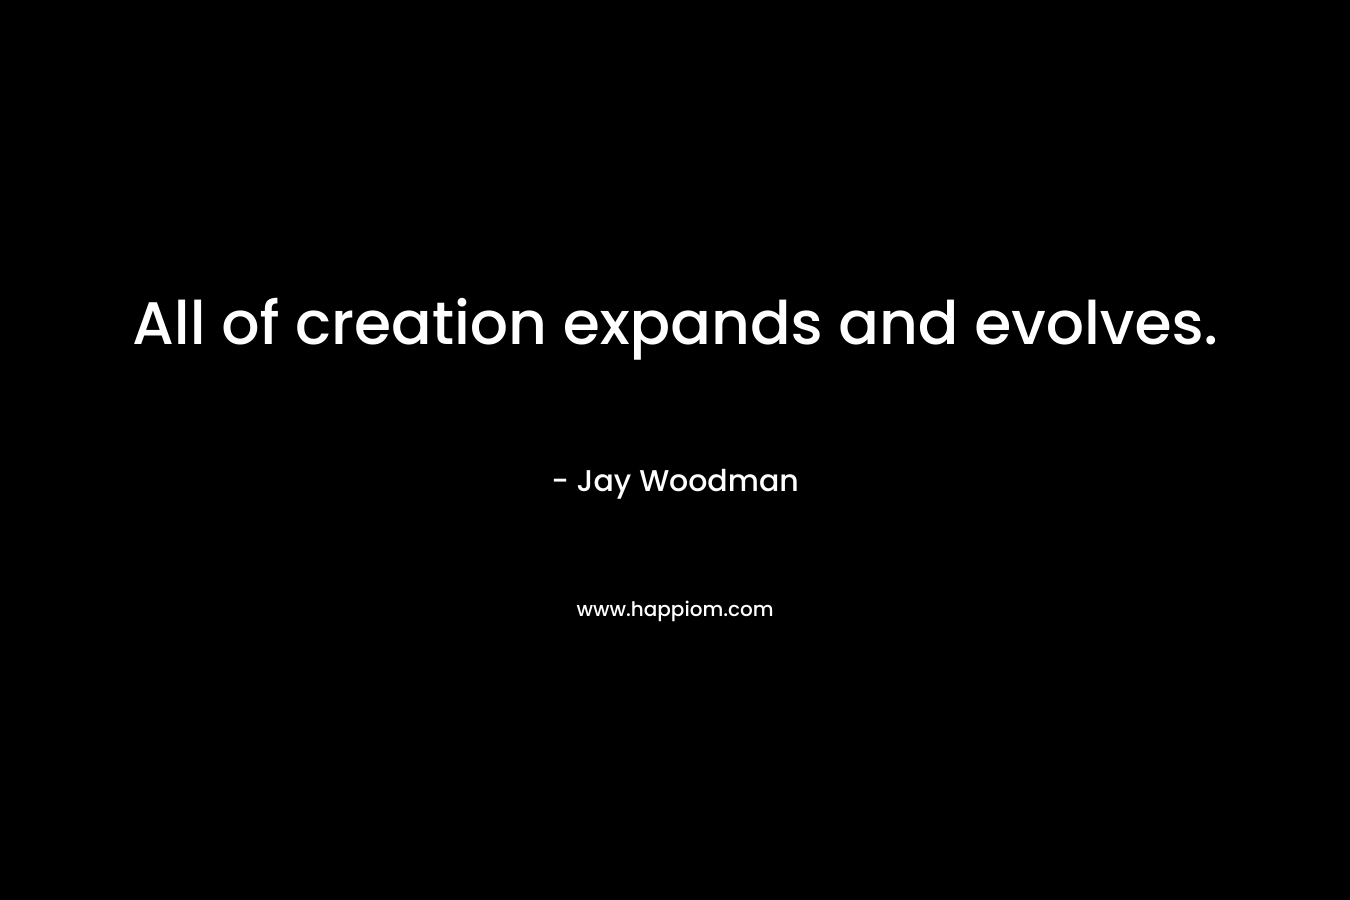 All of creation expands and evolves. – Jay Woodman